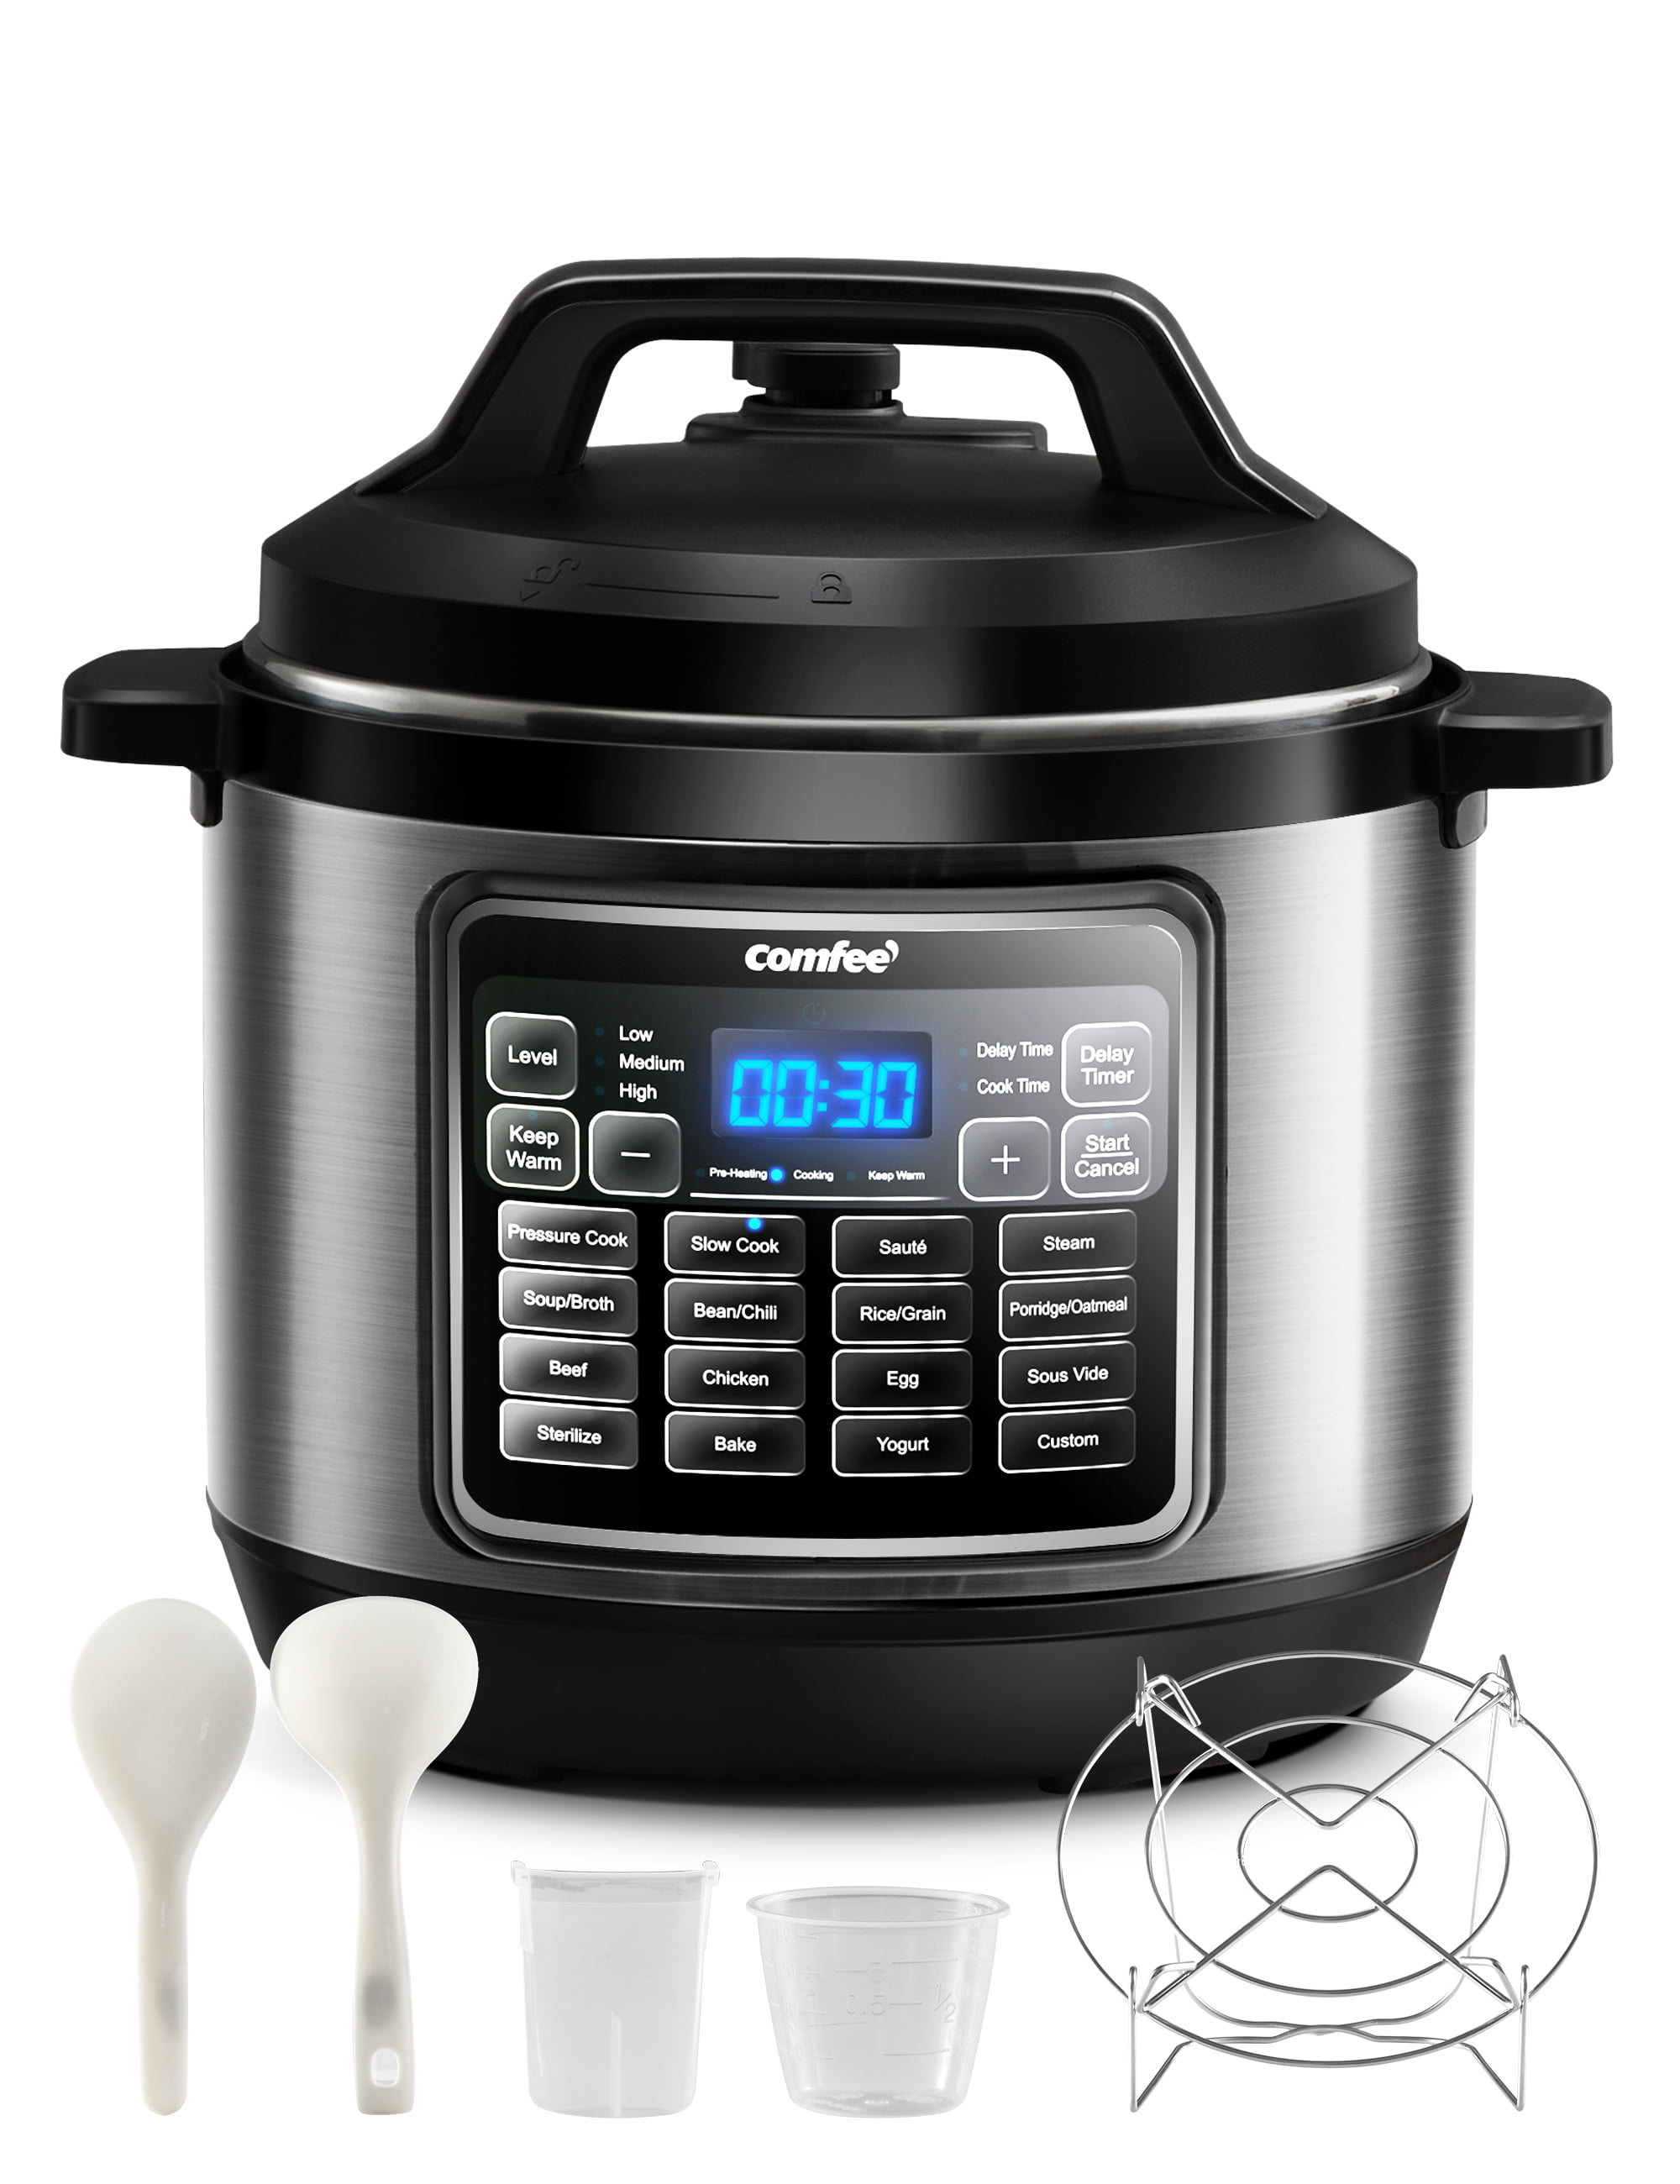 Comfee' Rice Cooker, 6-in-1 Stainless Steel Multi Cooker, Slow Cooker, Steamer, Saute, and Warmer, 2 qt, 8 Cups Cooked, Brown Rice, Quinoa and Oatmeal